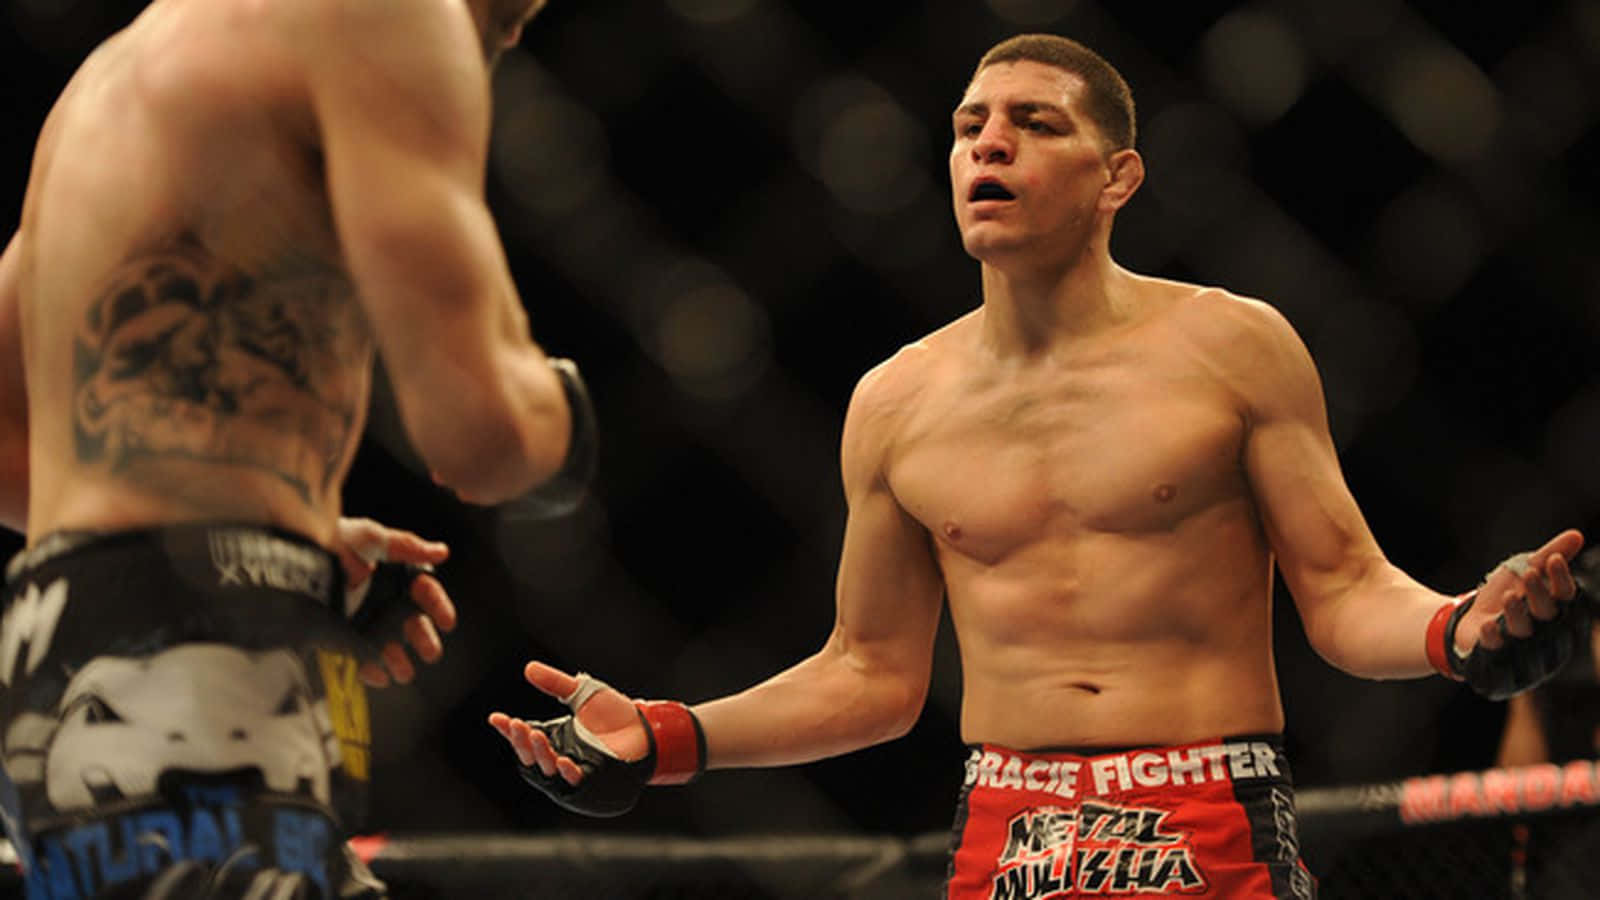 Nick Diaz Taunting His Opponent Wallpaper